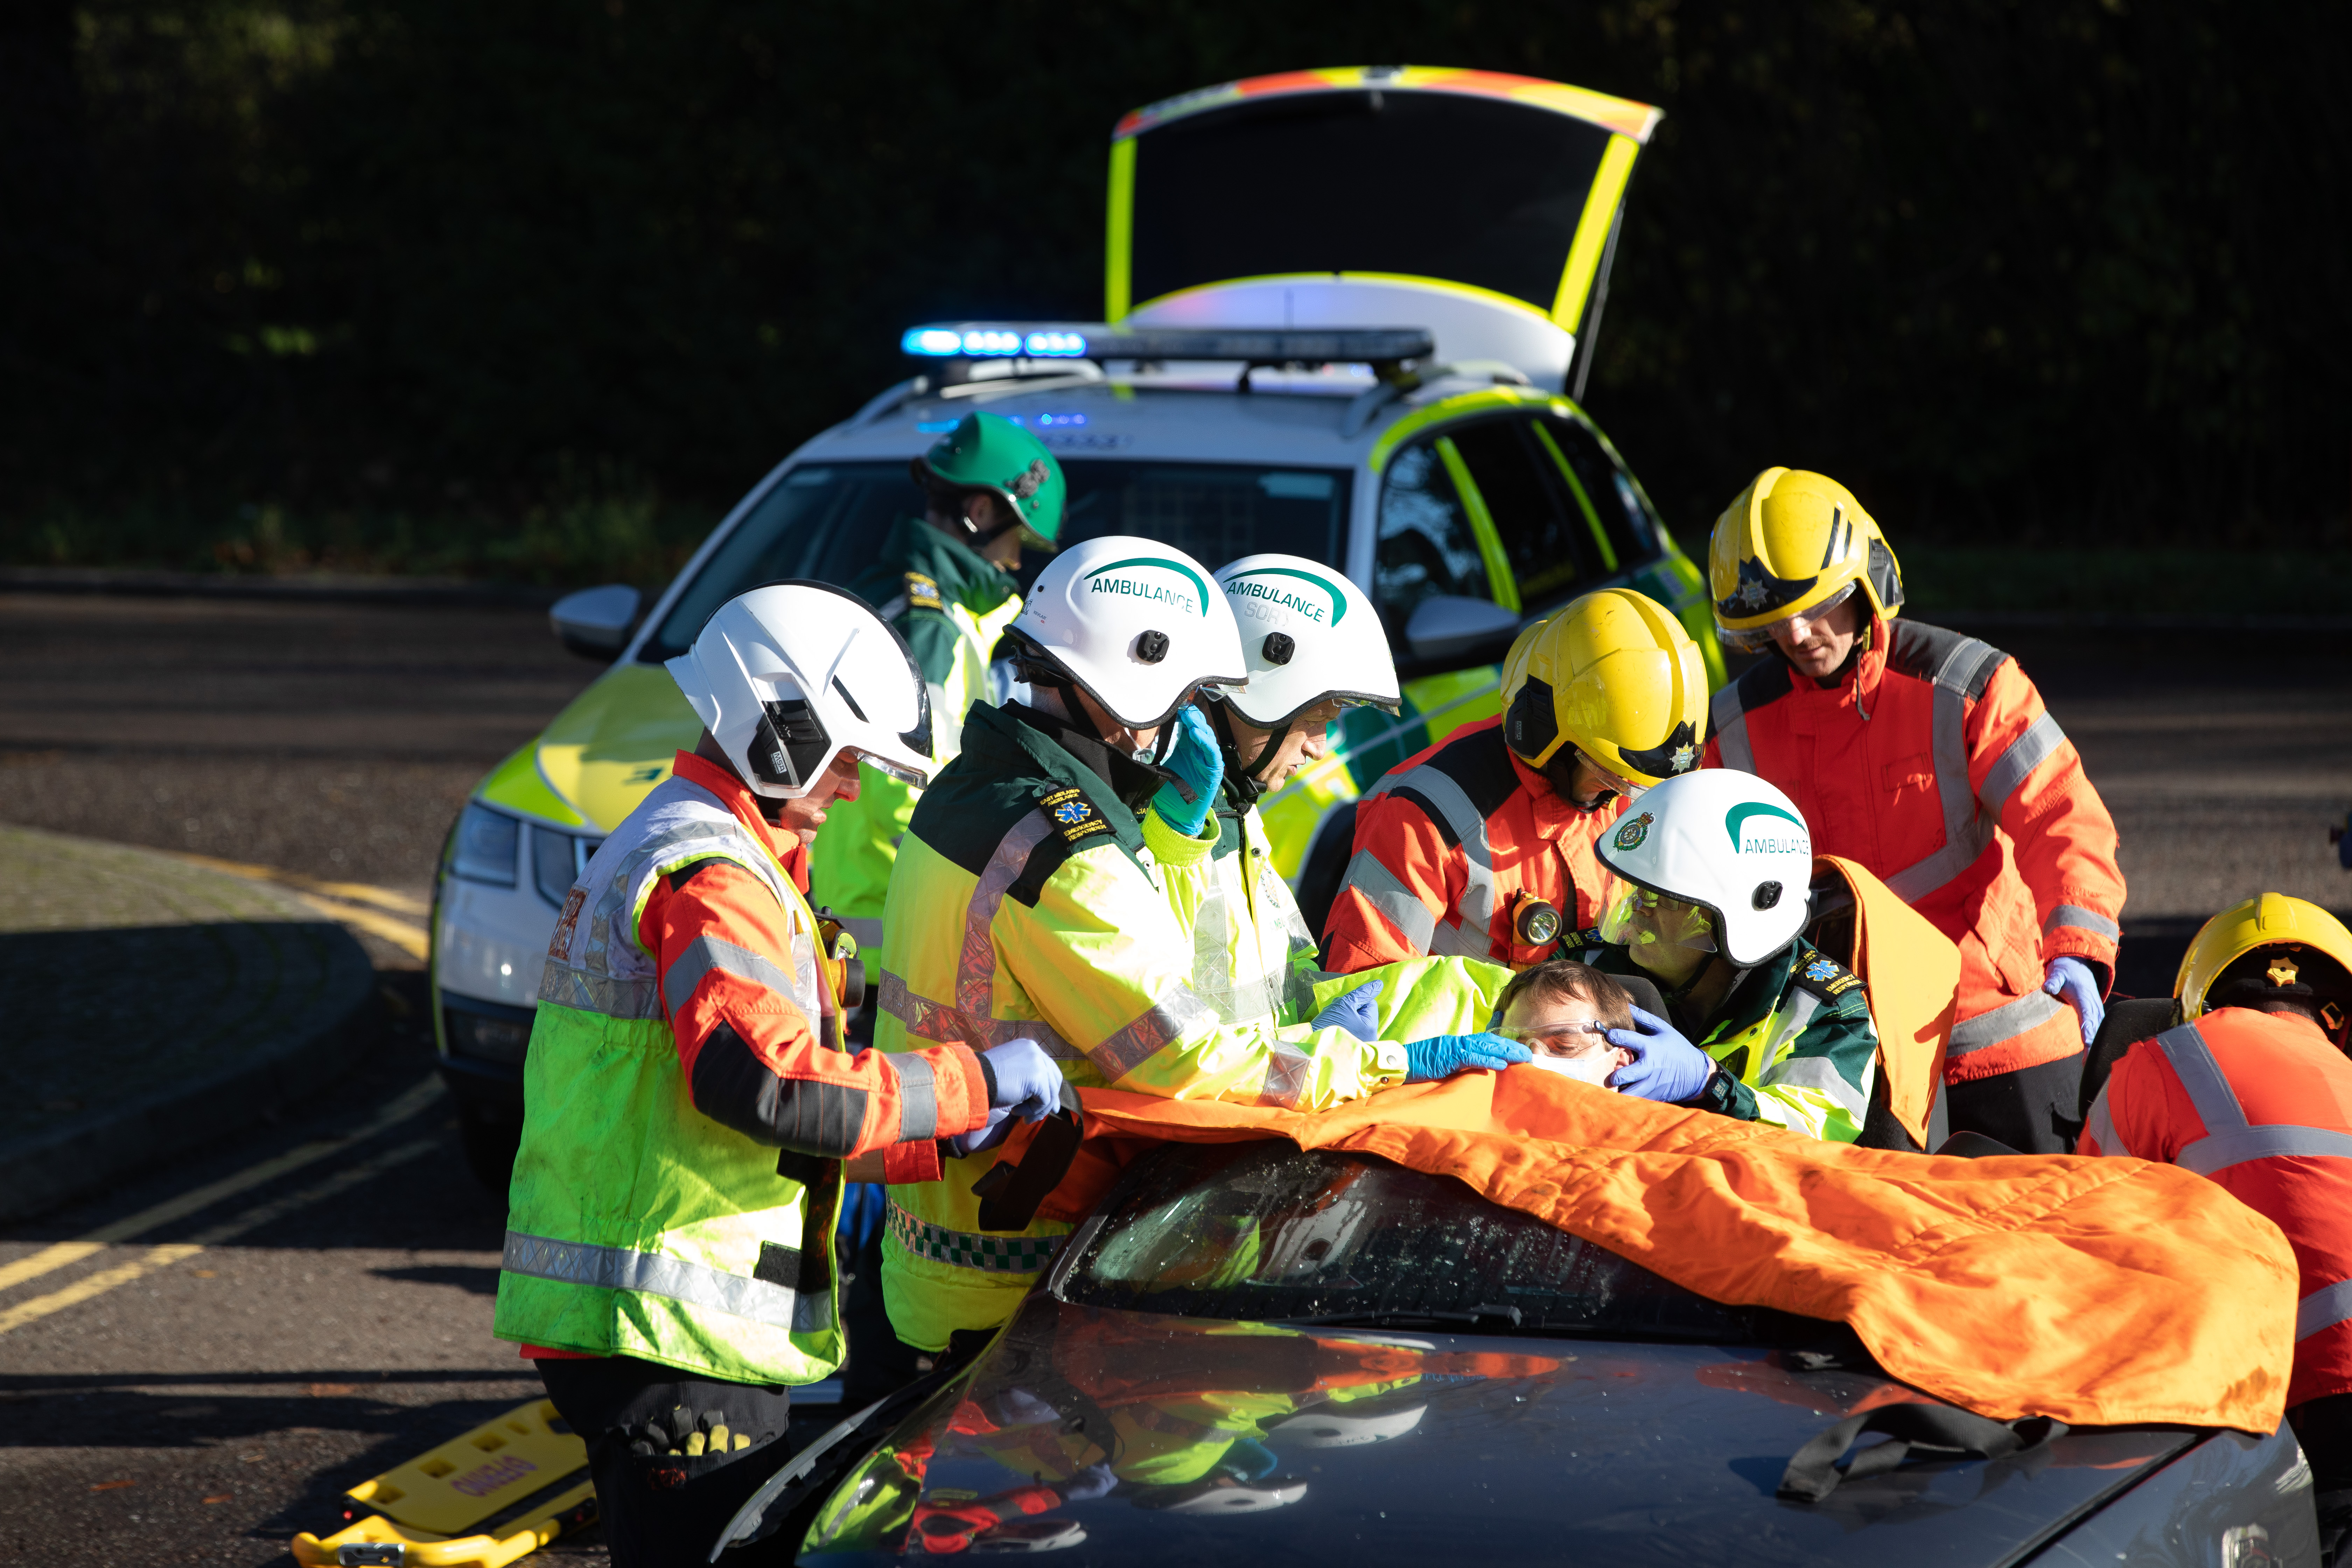 RAF Wittering Co-Responders during a training exercise on Station Safety Day